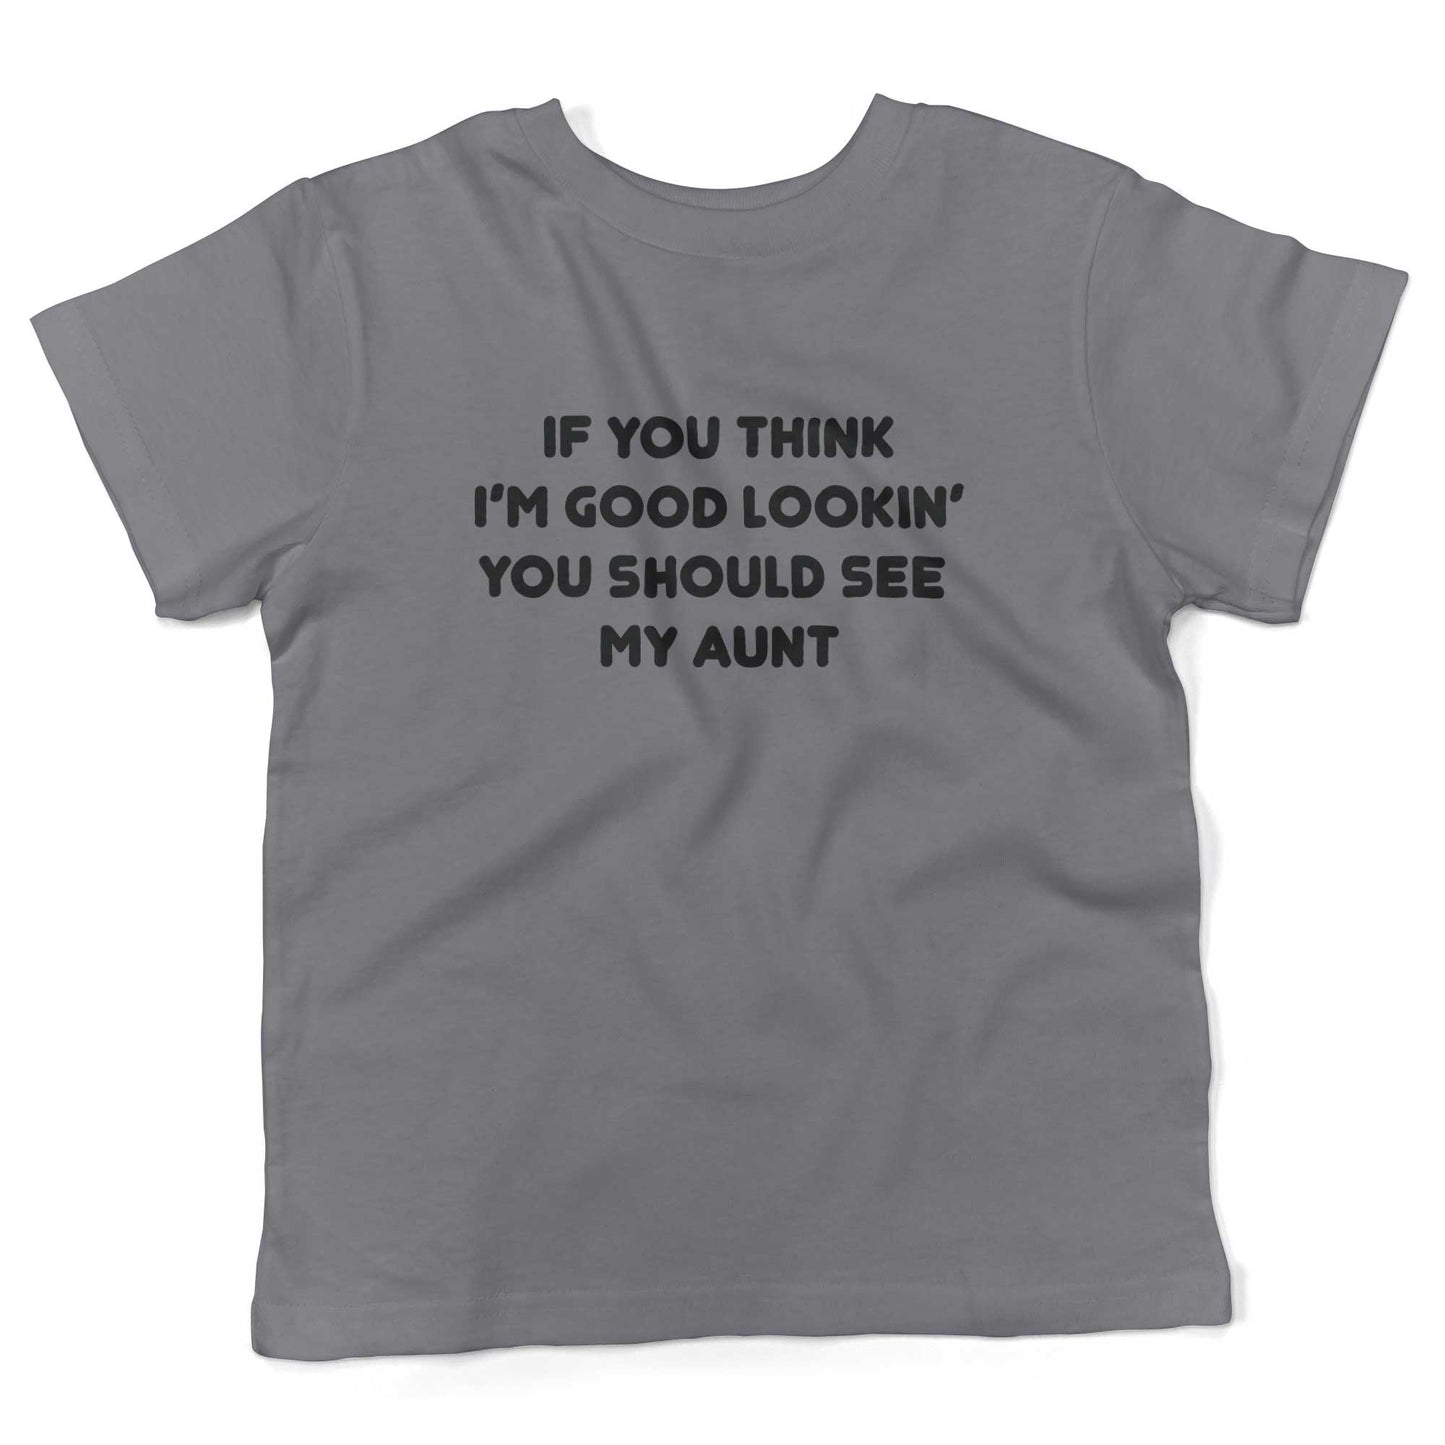 If You Think I'm Good Lookin' You Should See My Aunt Toddler Shirt-Slate-2T